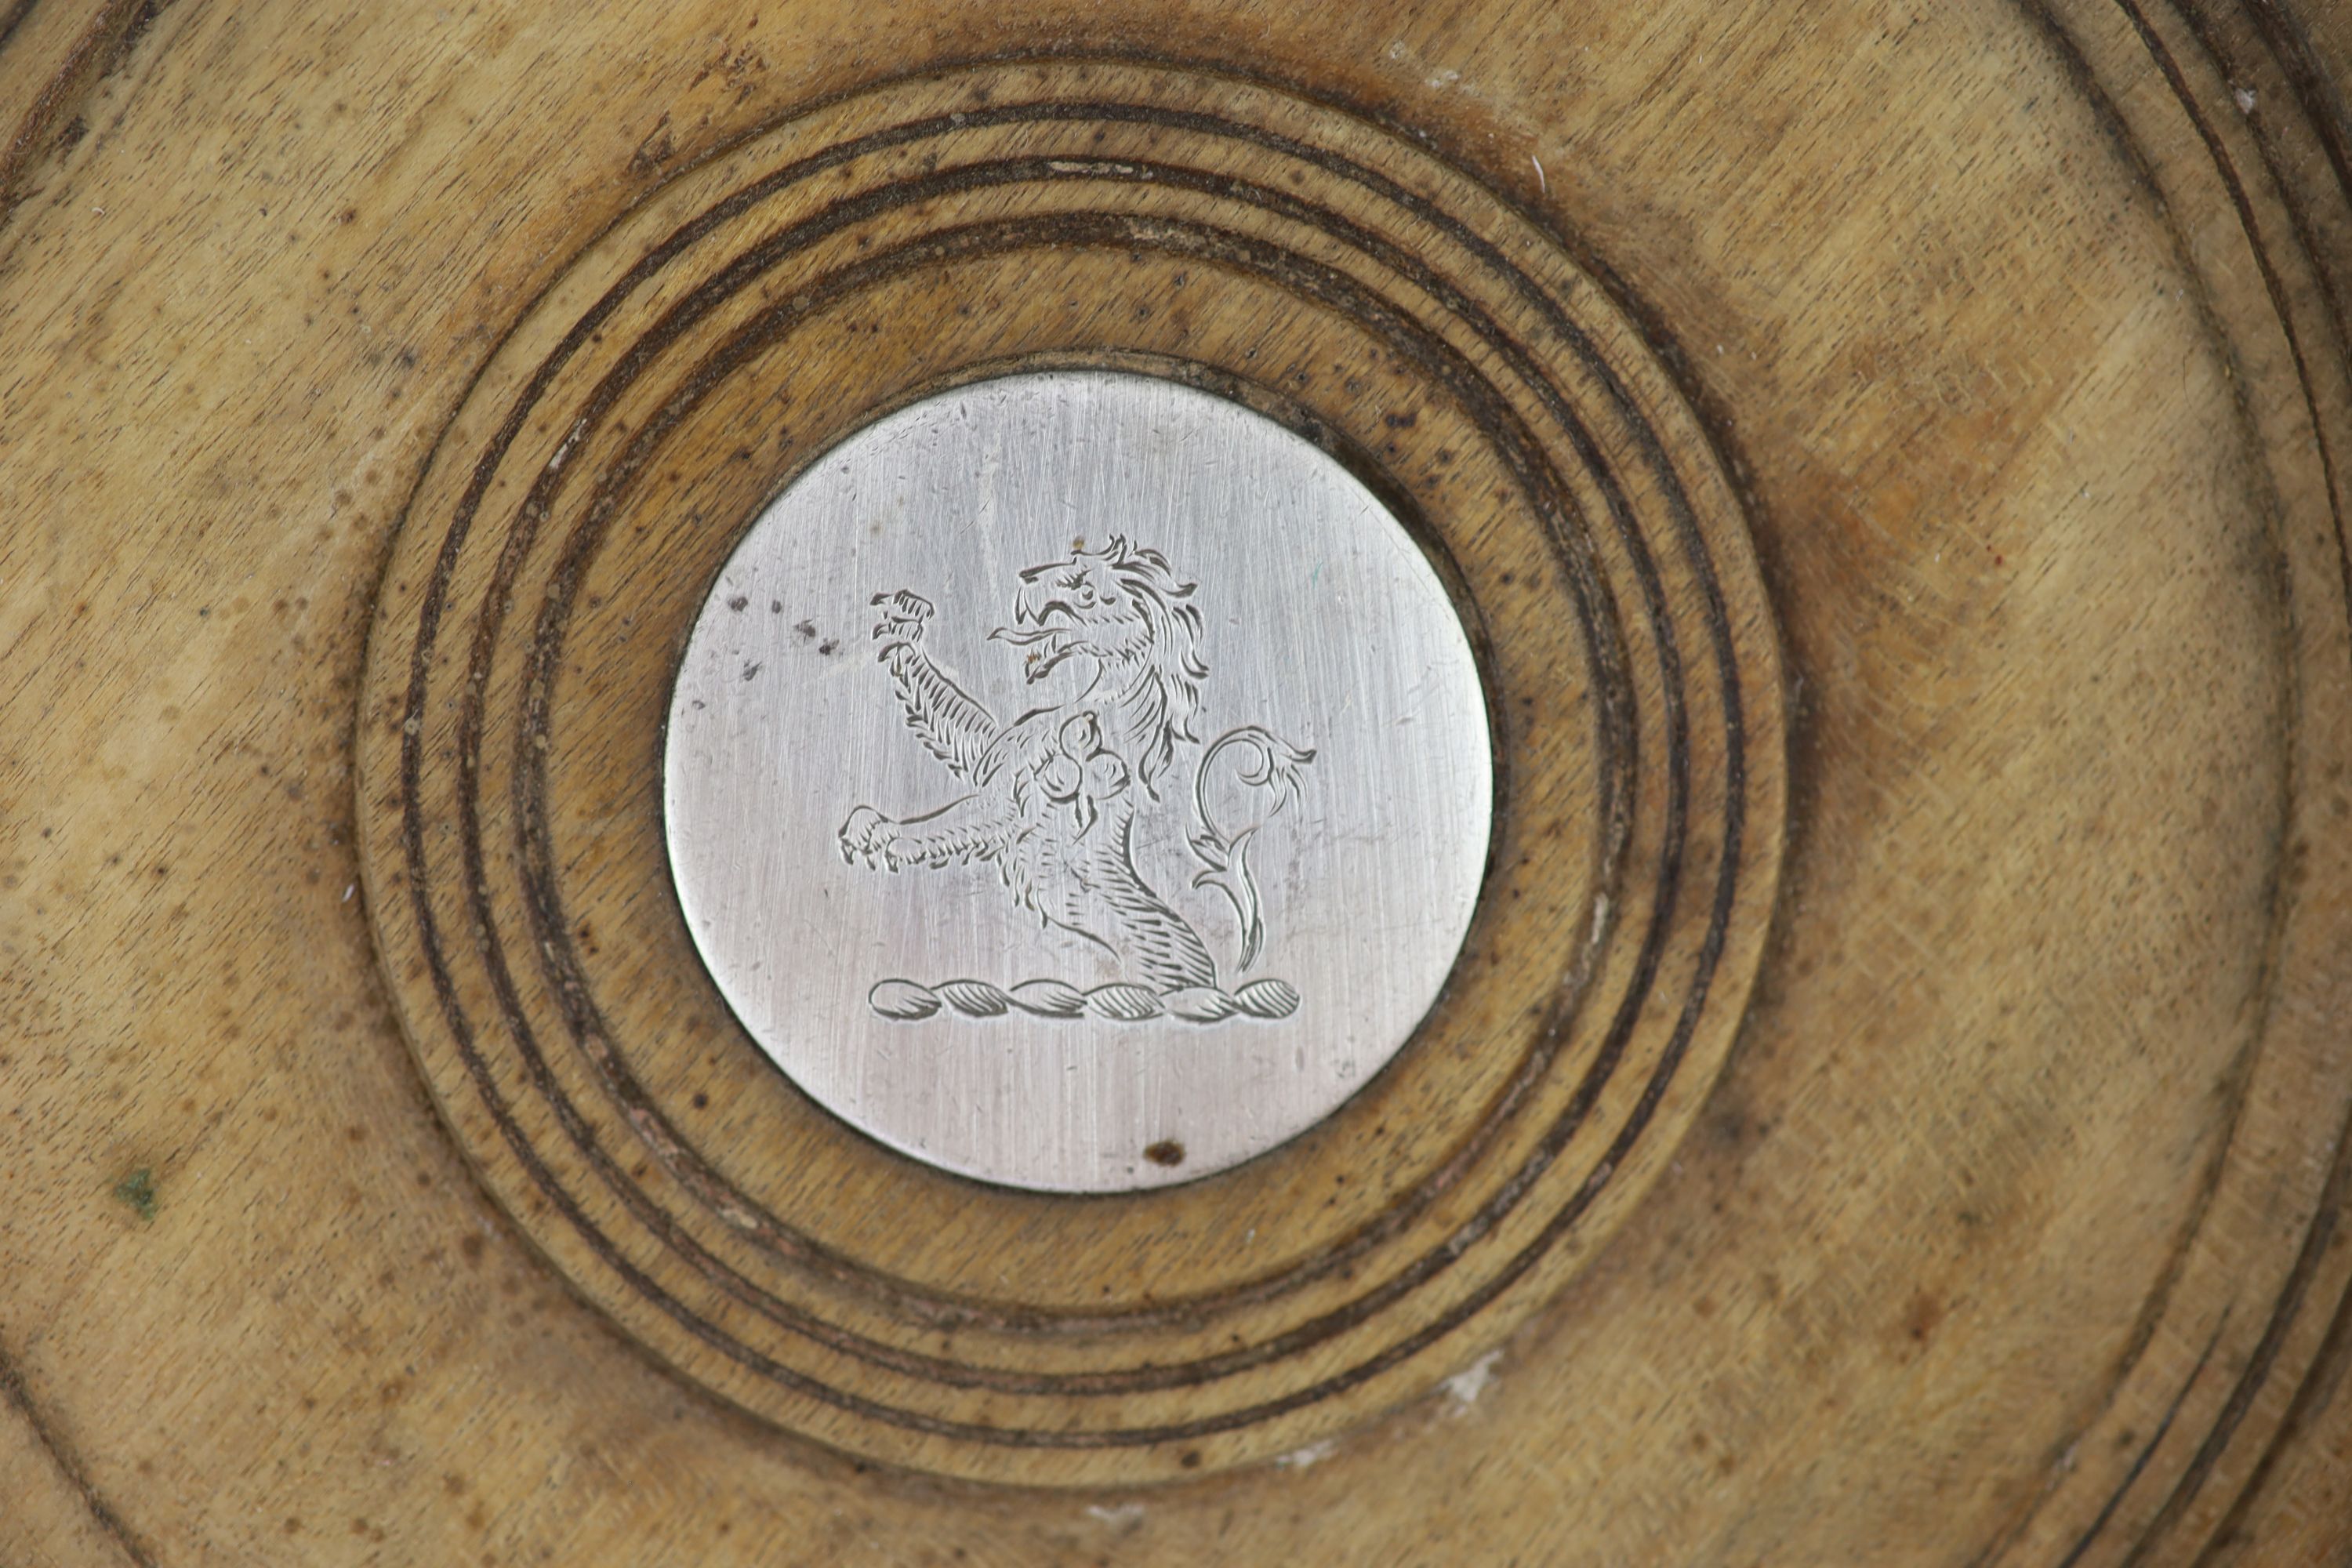 A George III silver wine coaster by Paul Storr